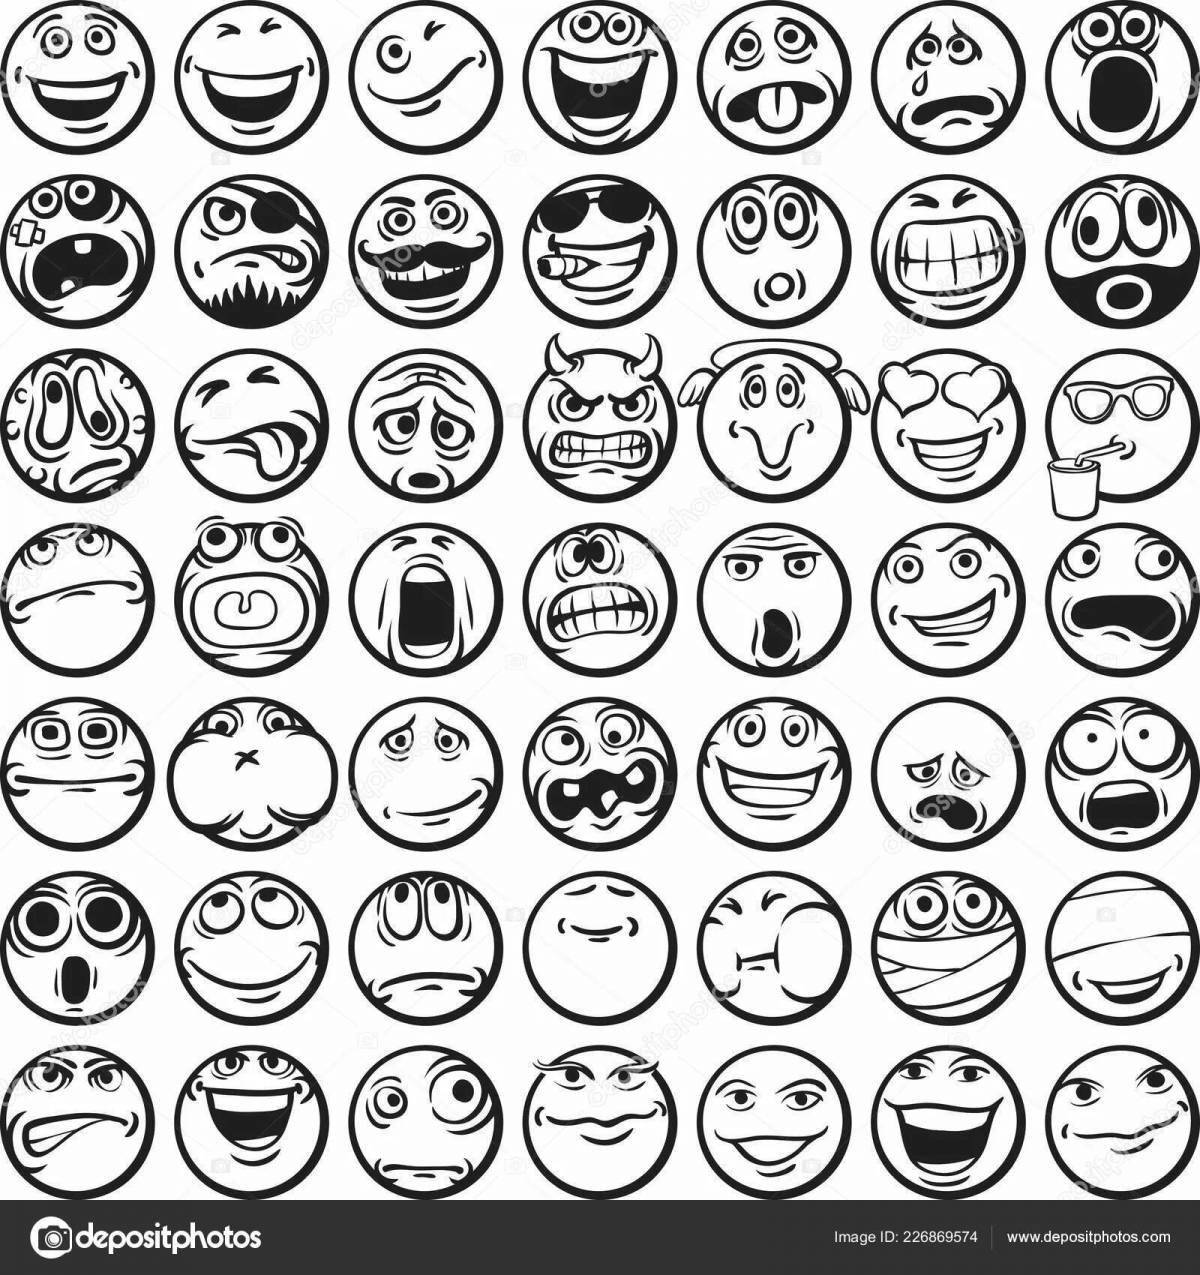 Witty coloring smileys funny